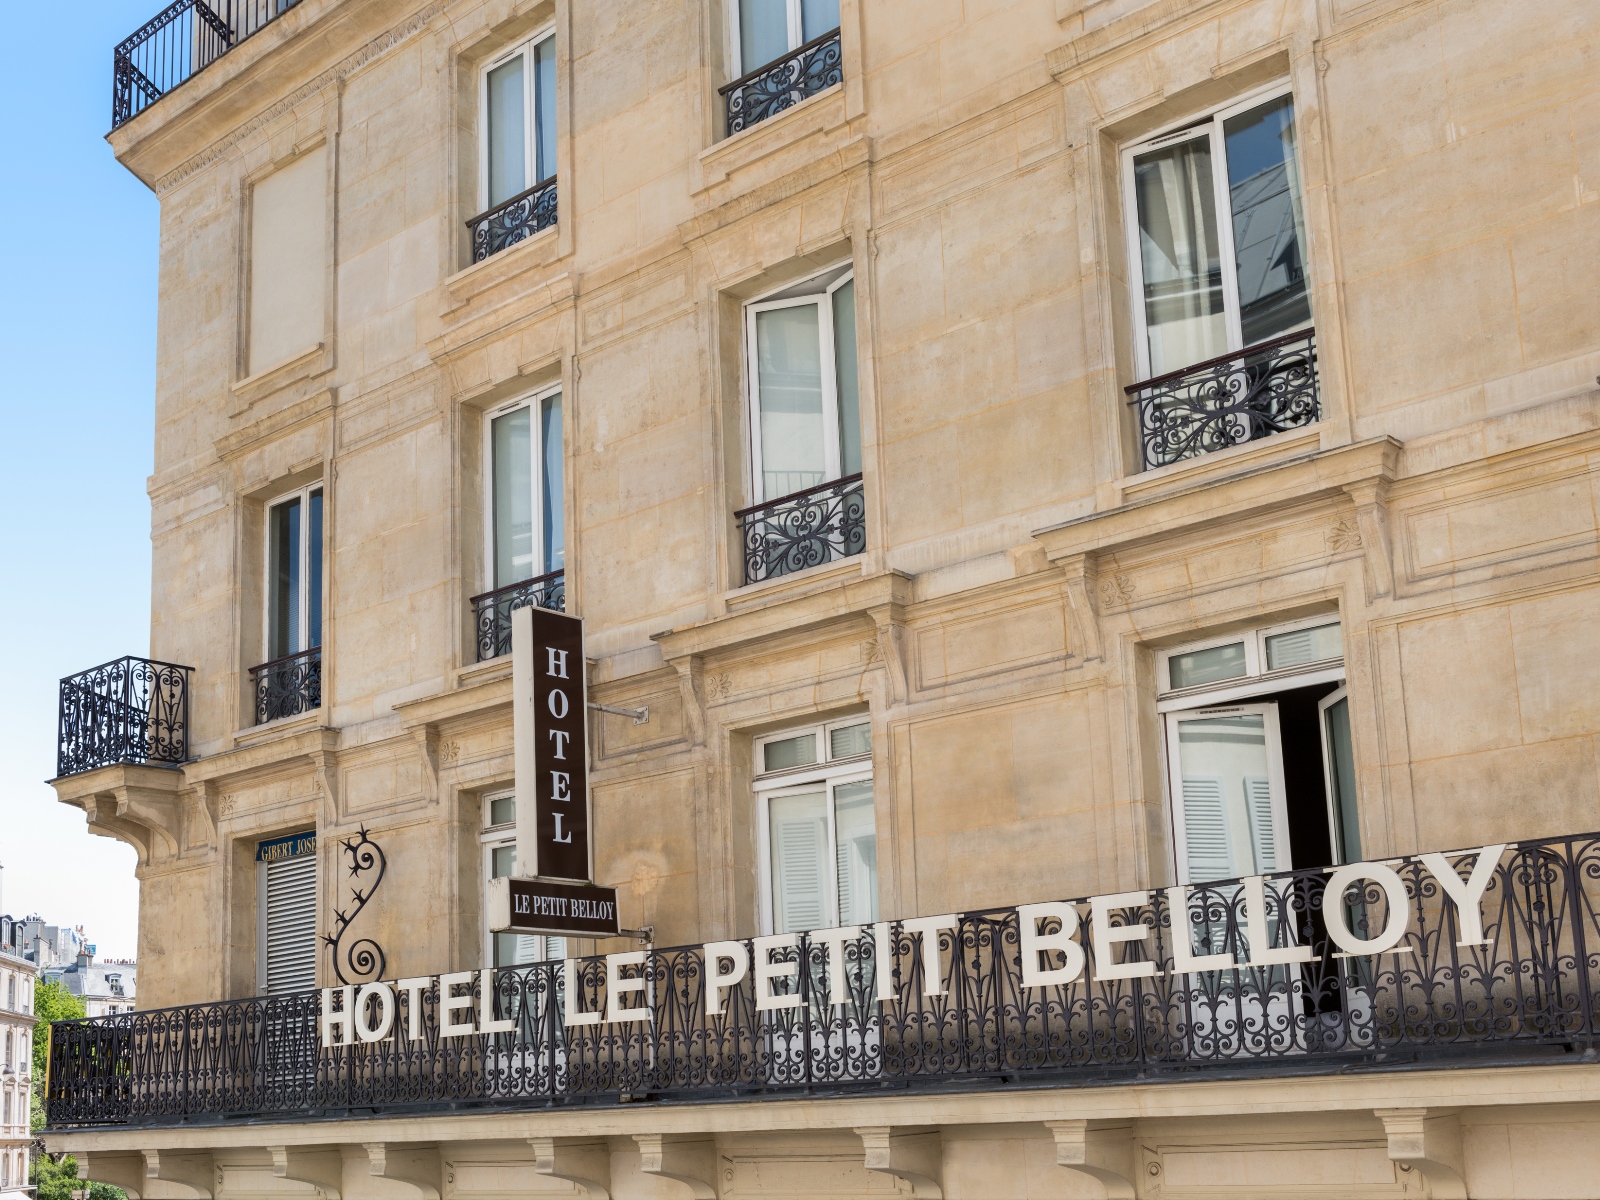 Petit Belloy Saint Germain Hotel <br/>94.44 ew <br/> <a href='http://vakantieoplossing.nl/outpage/?id=45d669bca7274d9fe8b9ccc3c747c1fa' target='_blank'>View Details</a>